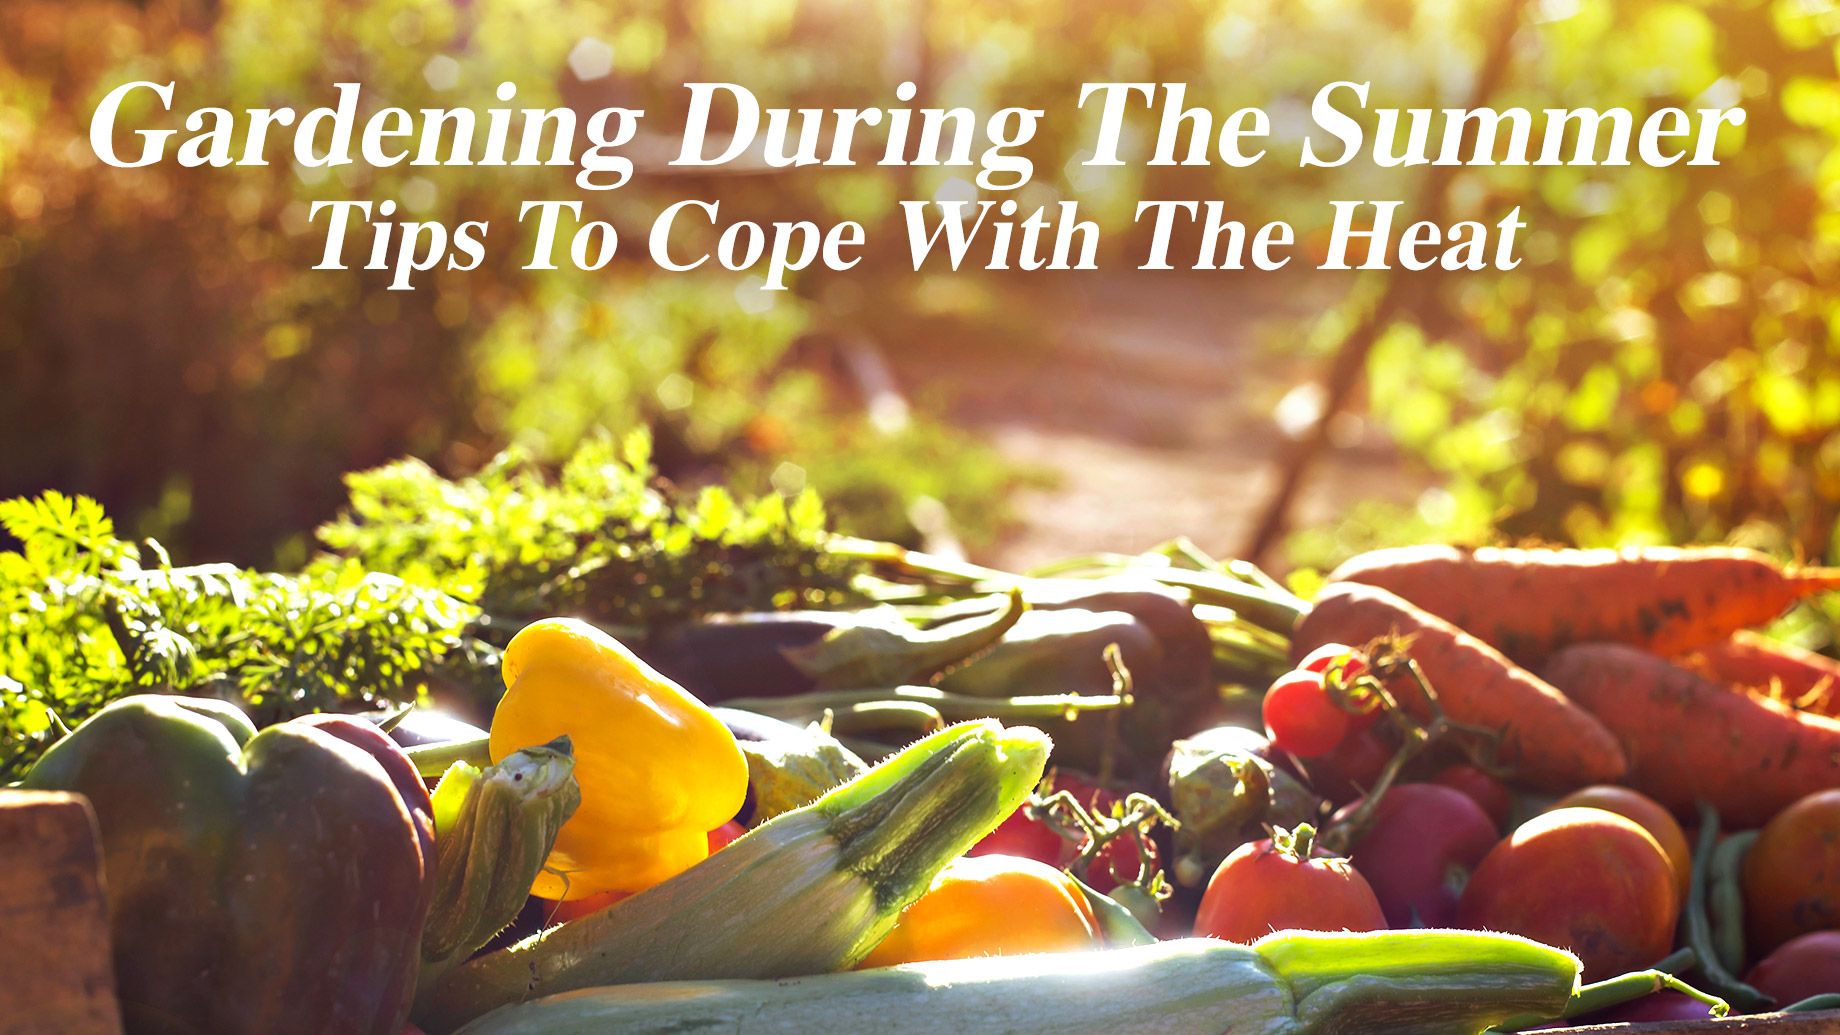 Gardening During The Summer - Tips To Cope With The Heat